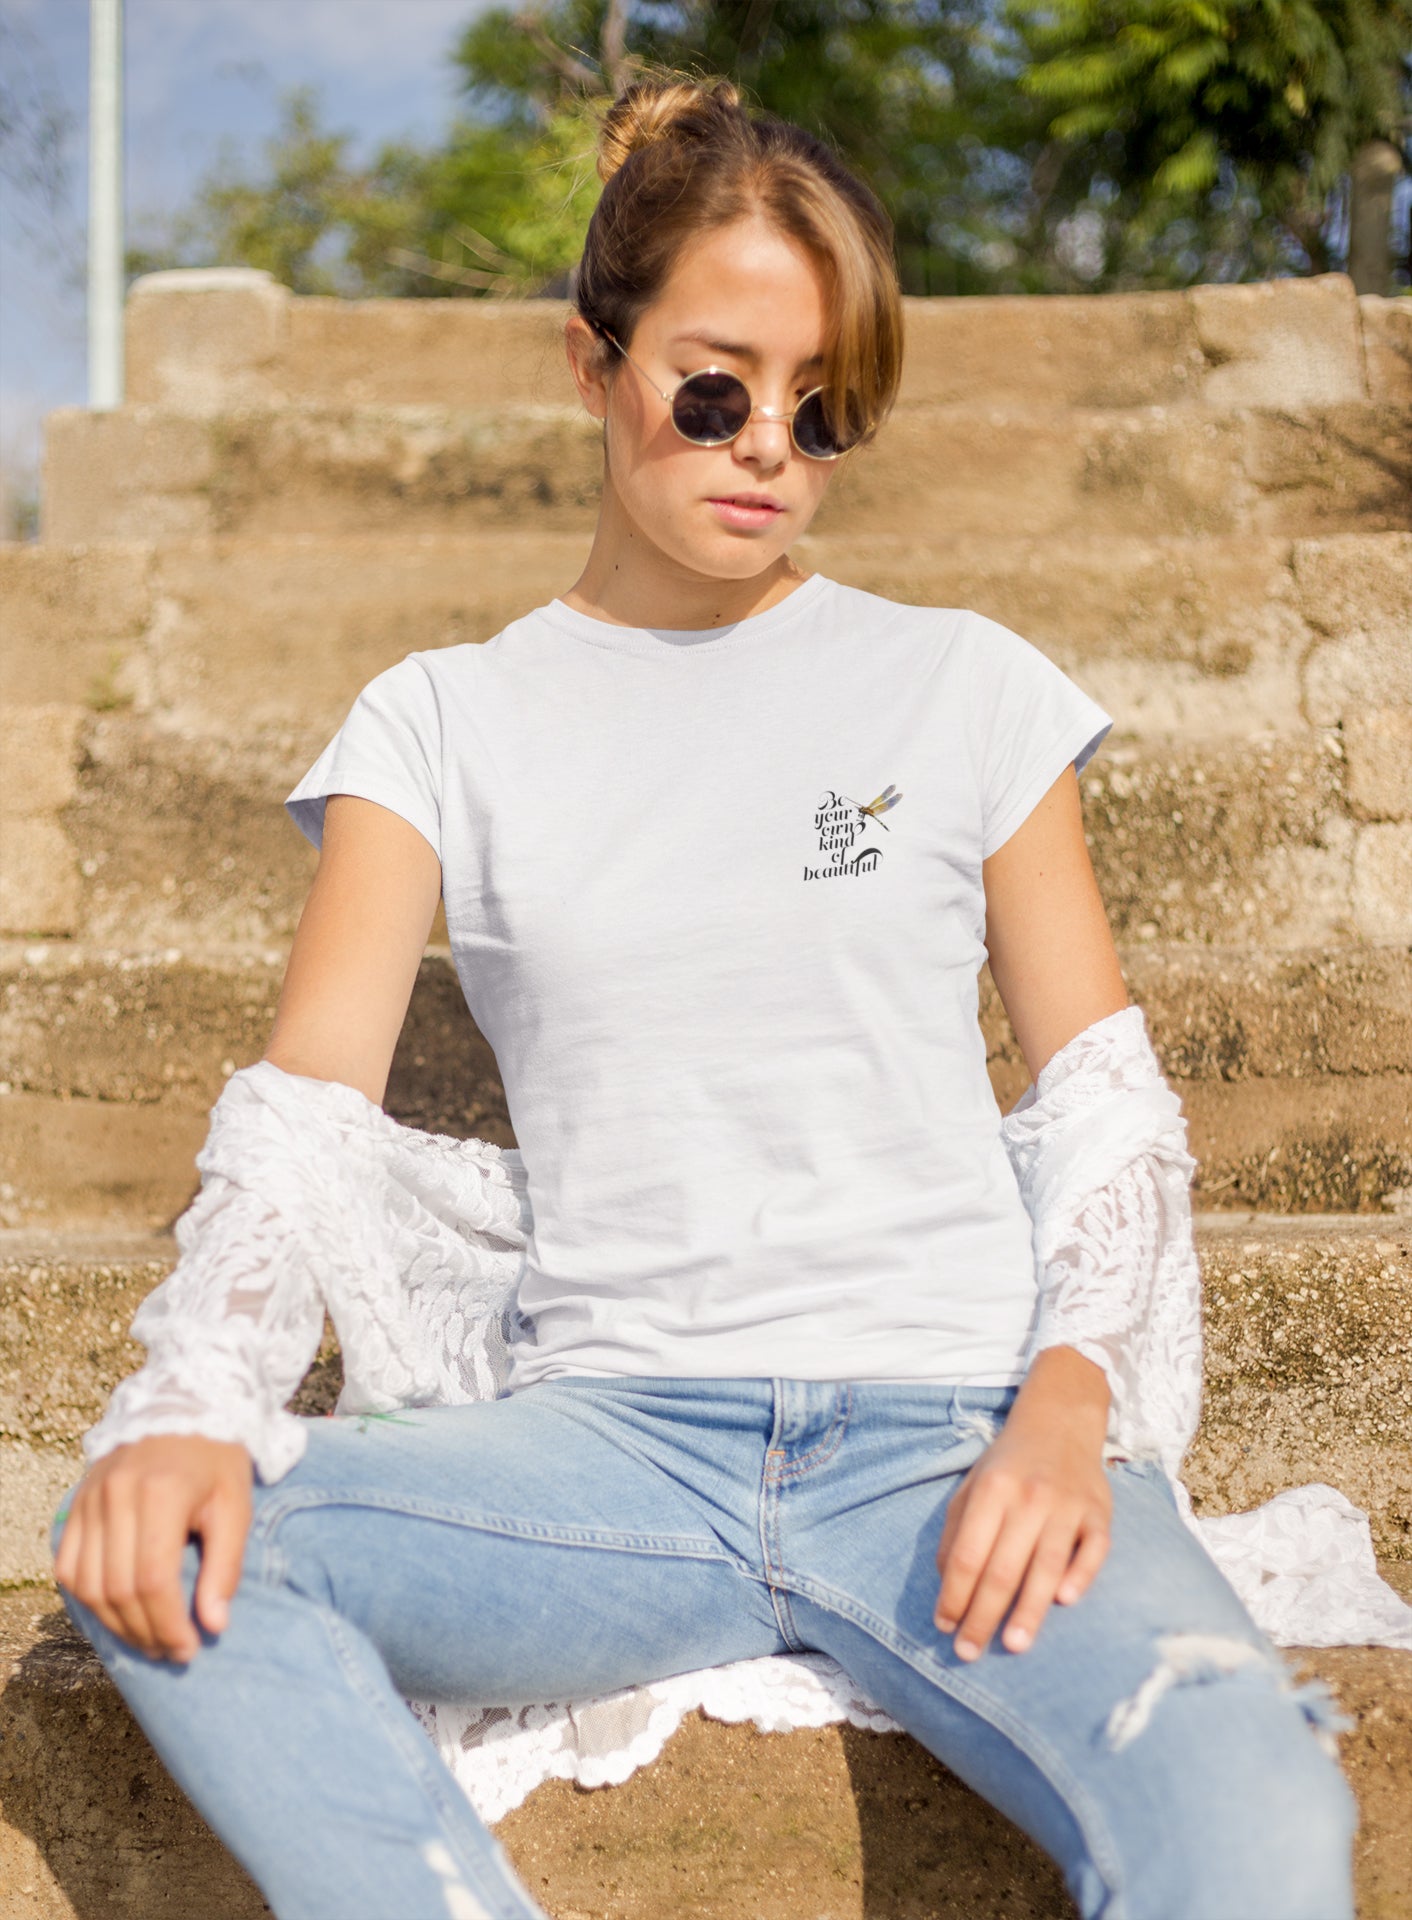 Summer T-shirt for Women( Own Kind Of Beautiful Pocket Print )